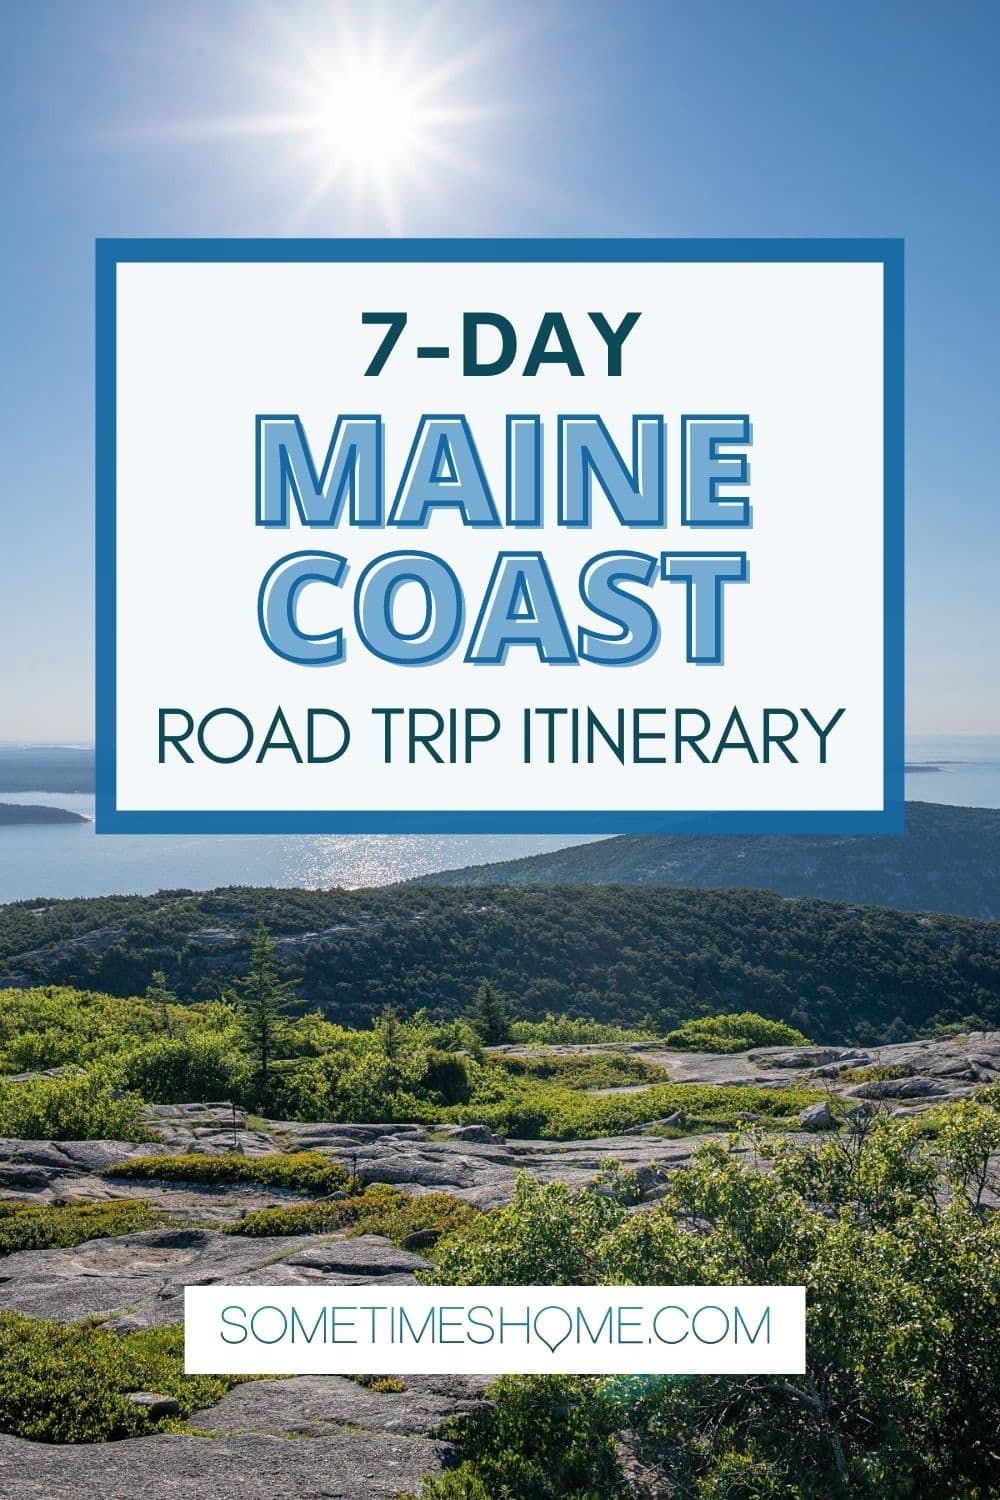 7-Day Maine Coast Road Trip Itinerary with a photo on a mountain top in Acadia National Park behind it.